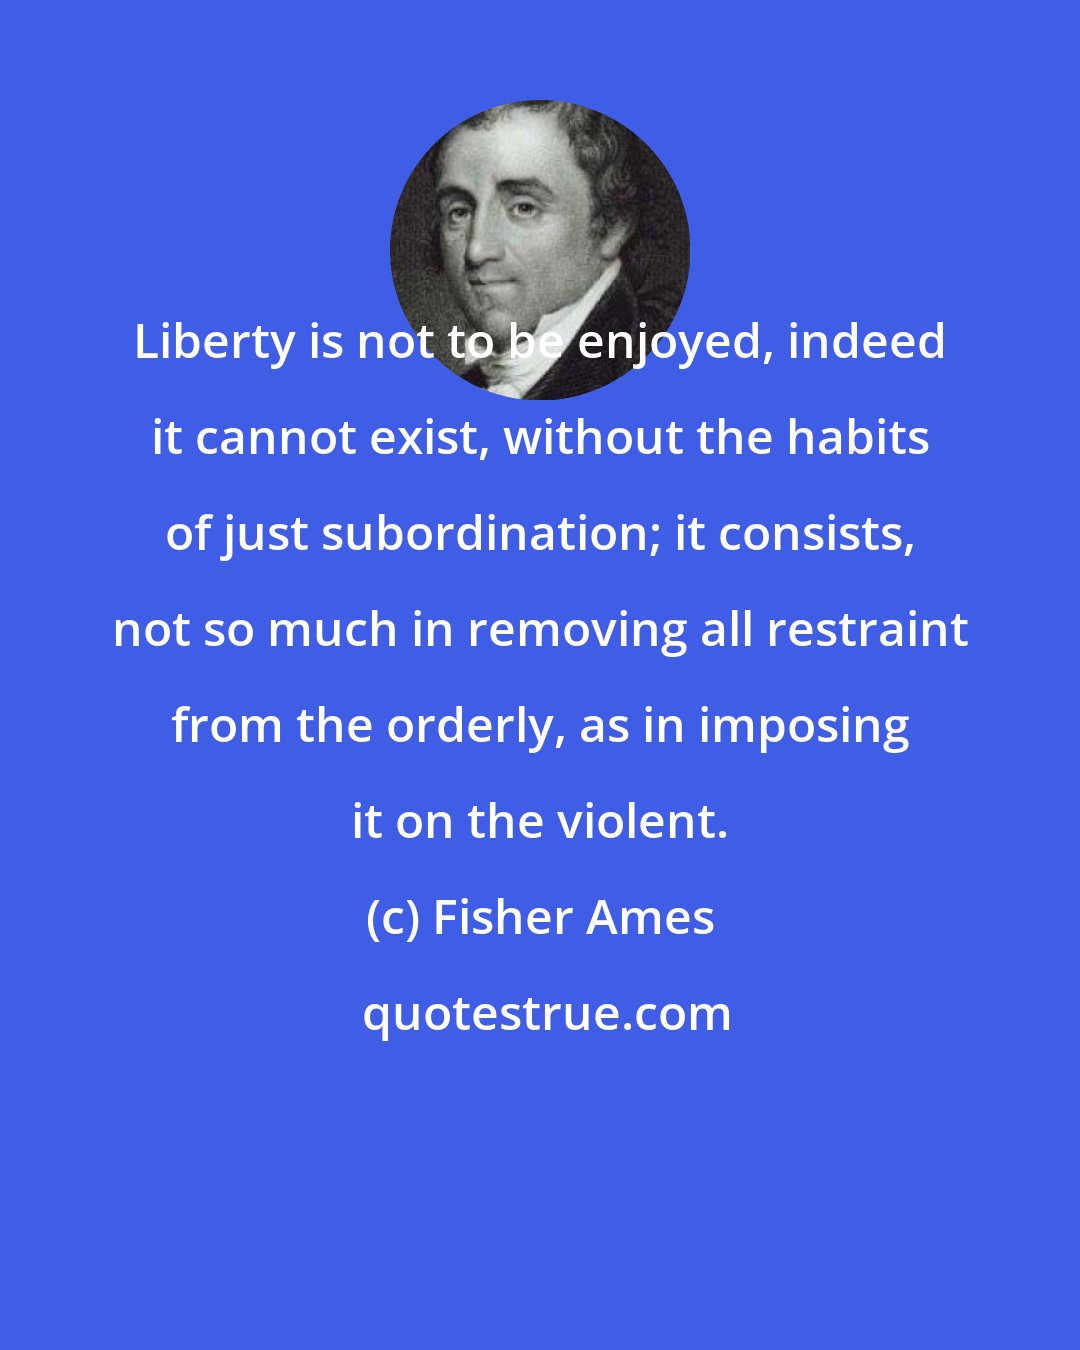 Fisher Ames: Liberty is not to be enjoyed, indeed it cannot exist, without the habits of just subordination; it consists, not so much in removing all restraint from the orderly, as in imposing it on the violent.